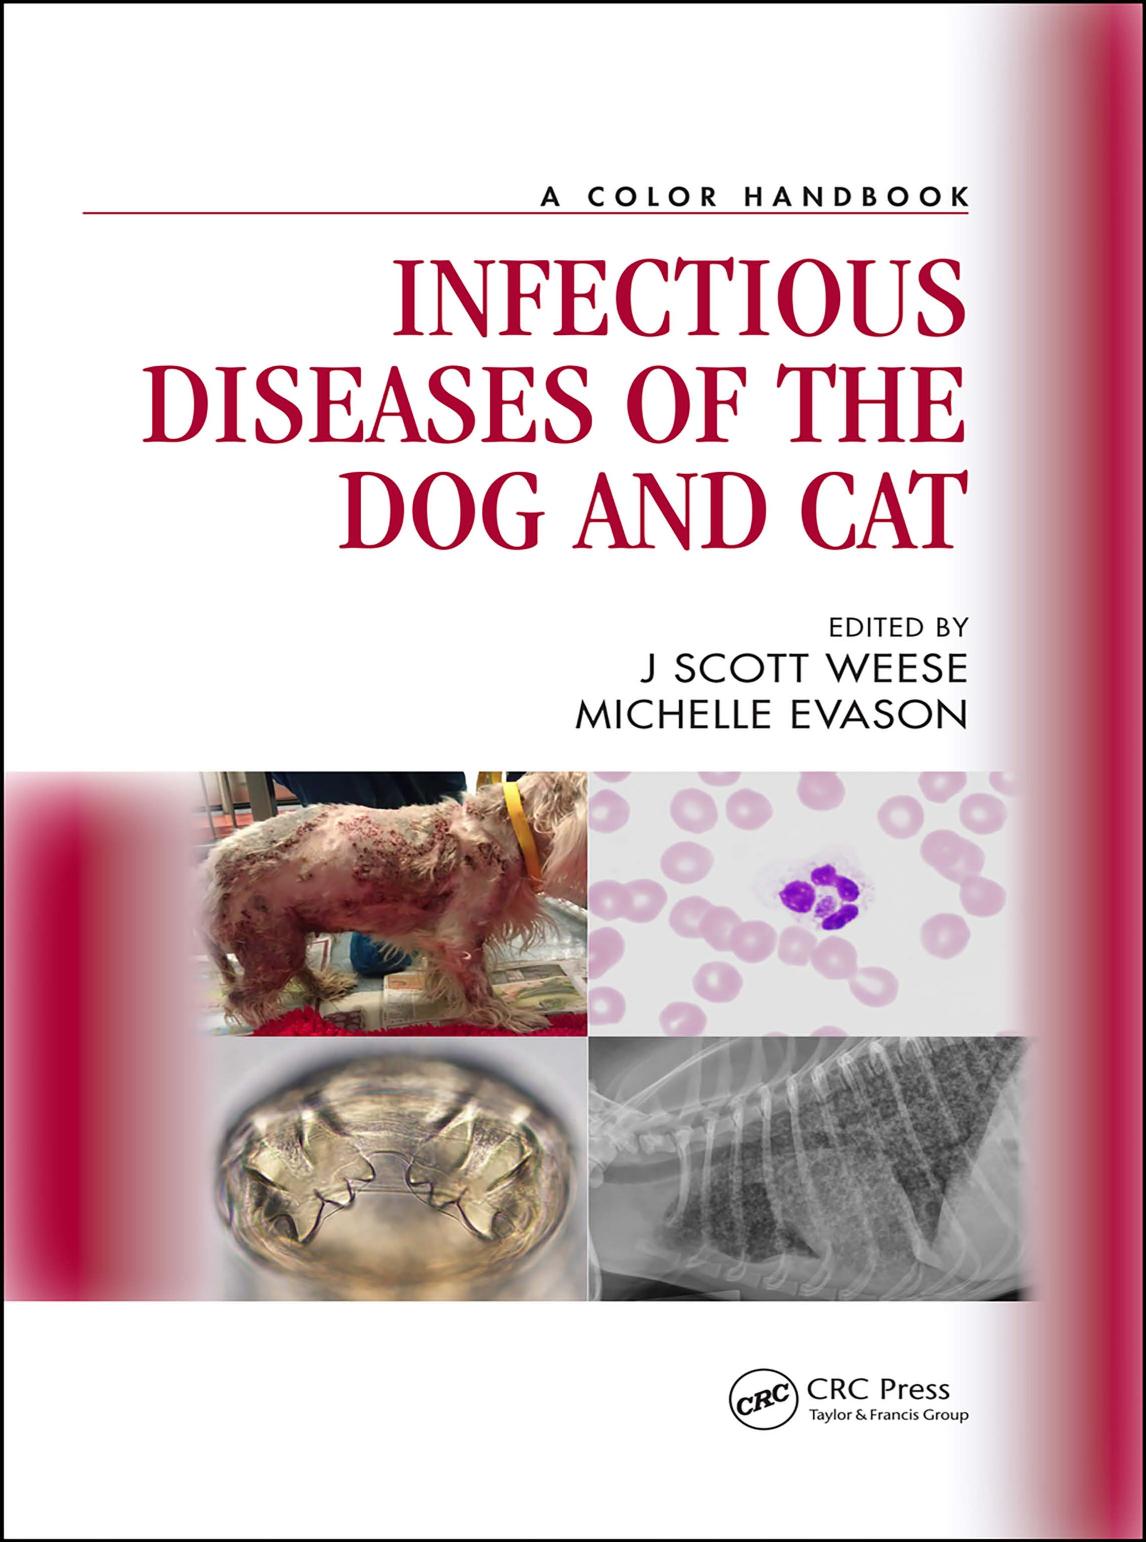 Infectious Diseases of the Dog and Cat, A Color Handbook 2020